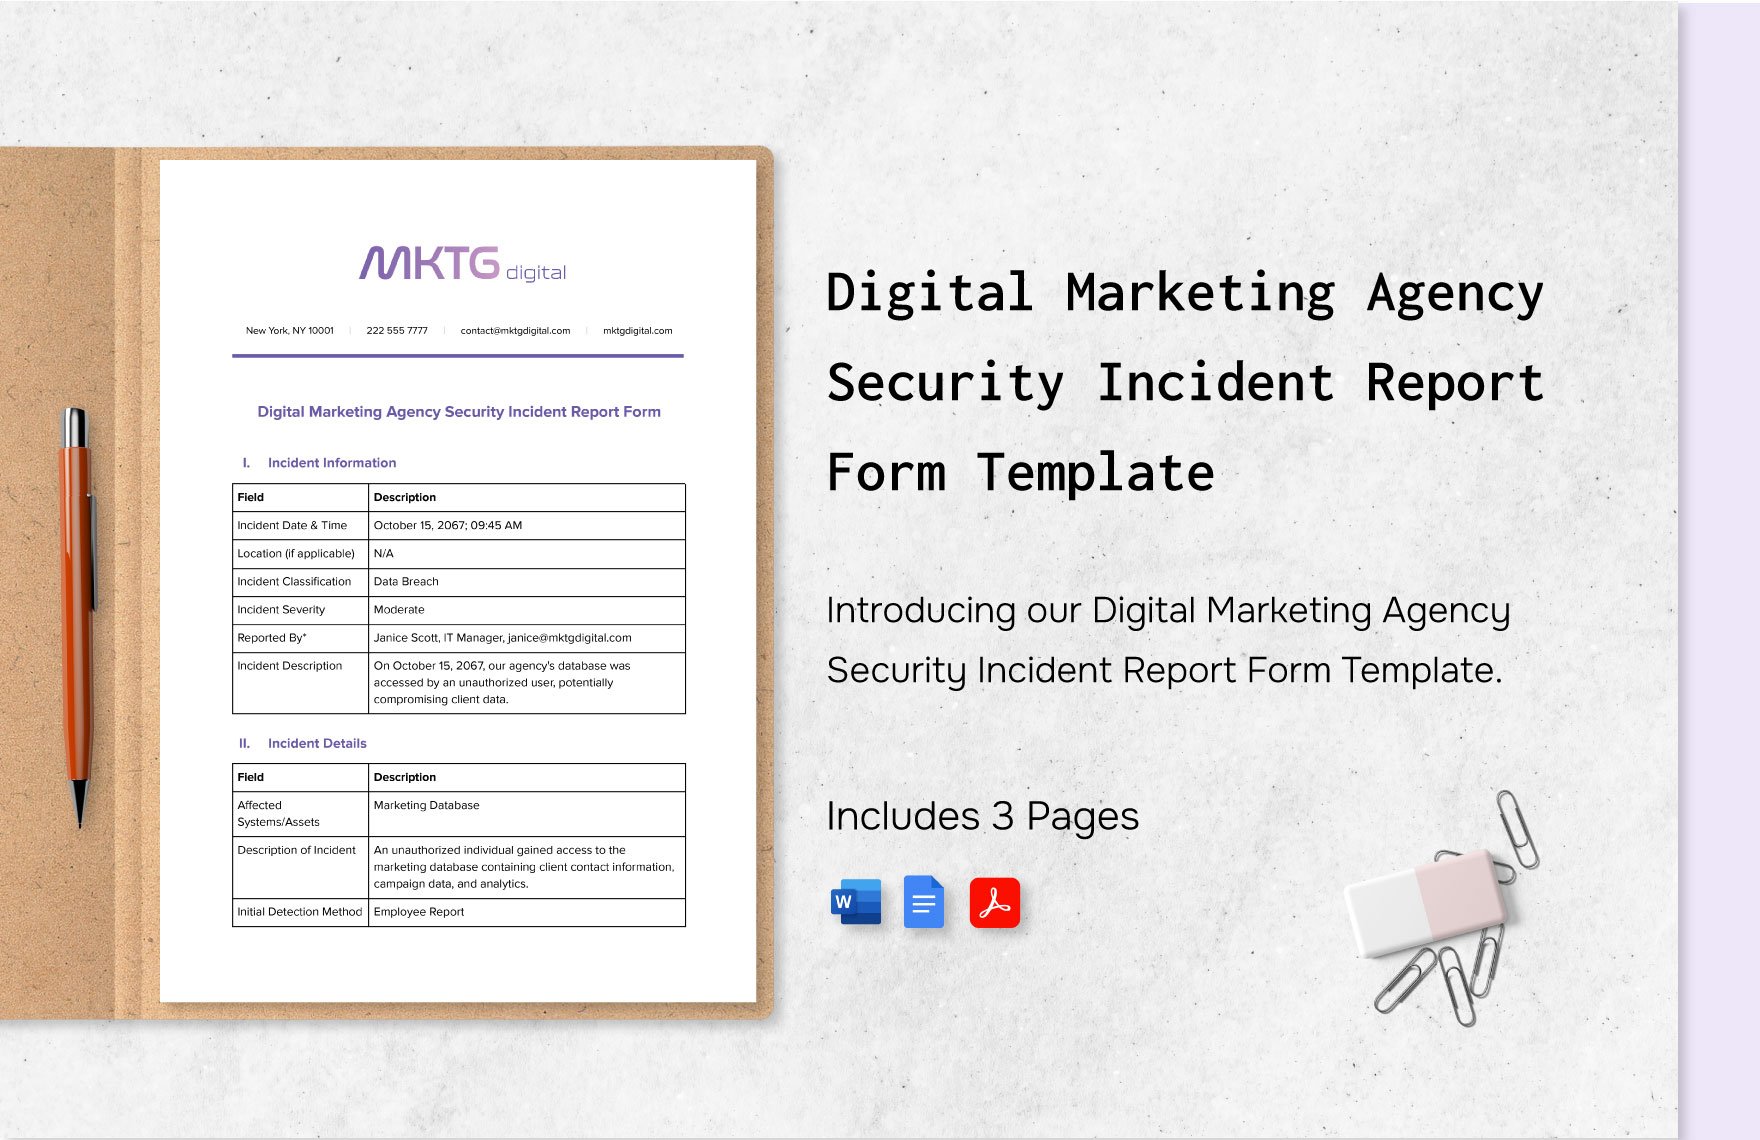 Digital Marketing Agency Security Incident Report Form Template in Word, Google Docs, PDF